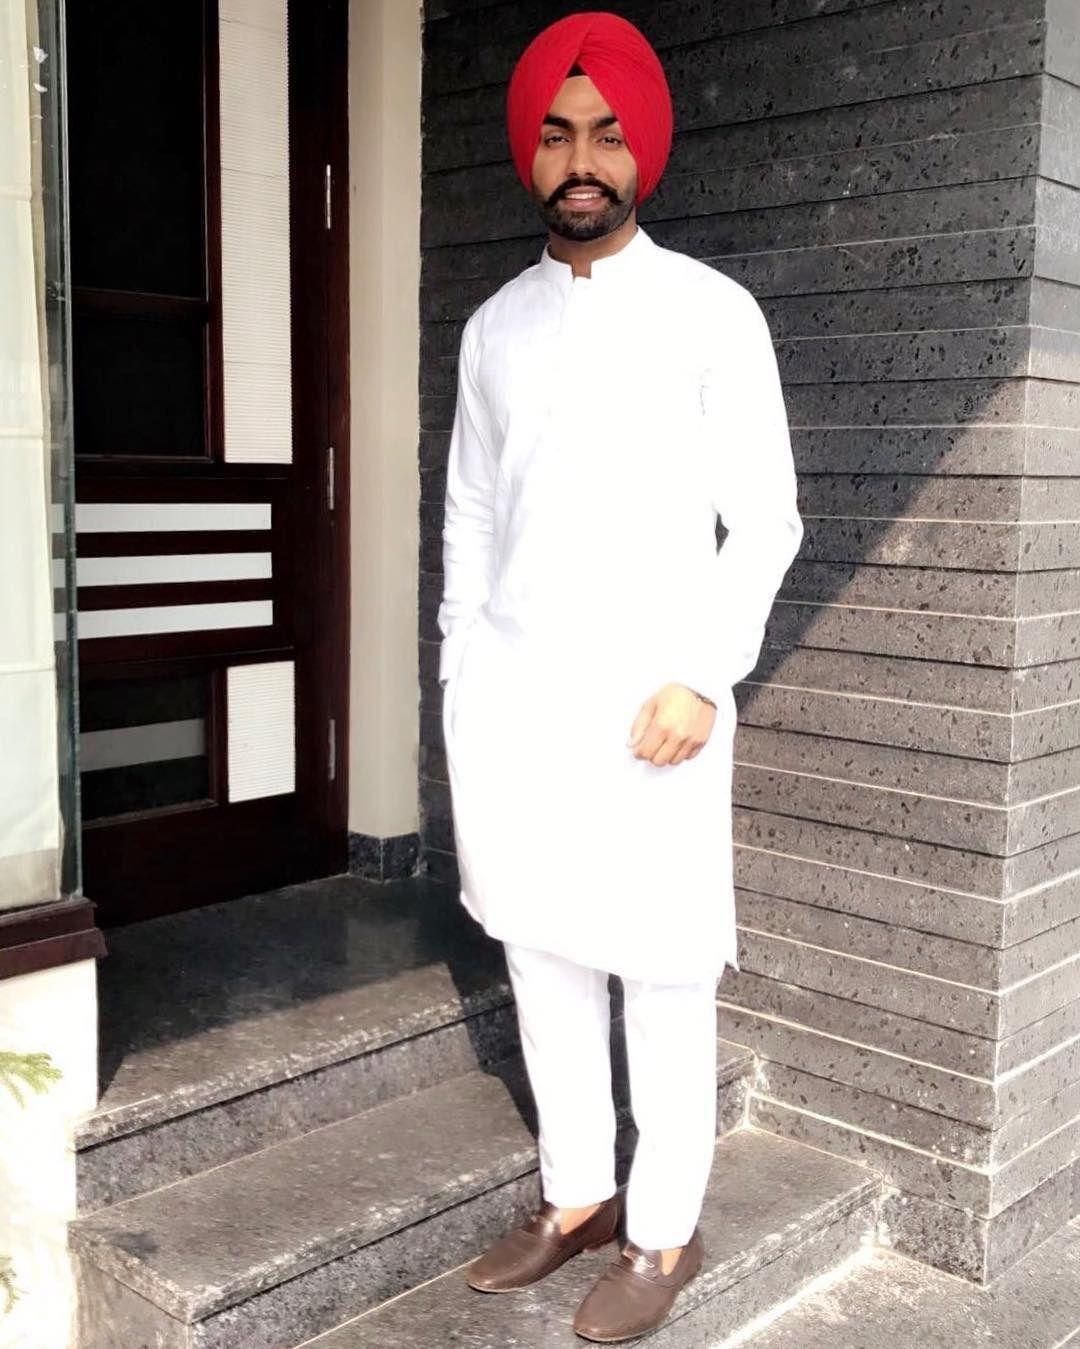 Lovely Ammy Virk Picture. Beautiful image HD Picture & Desktop